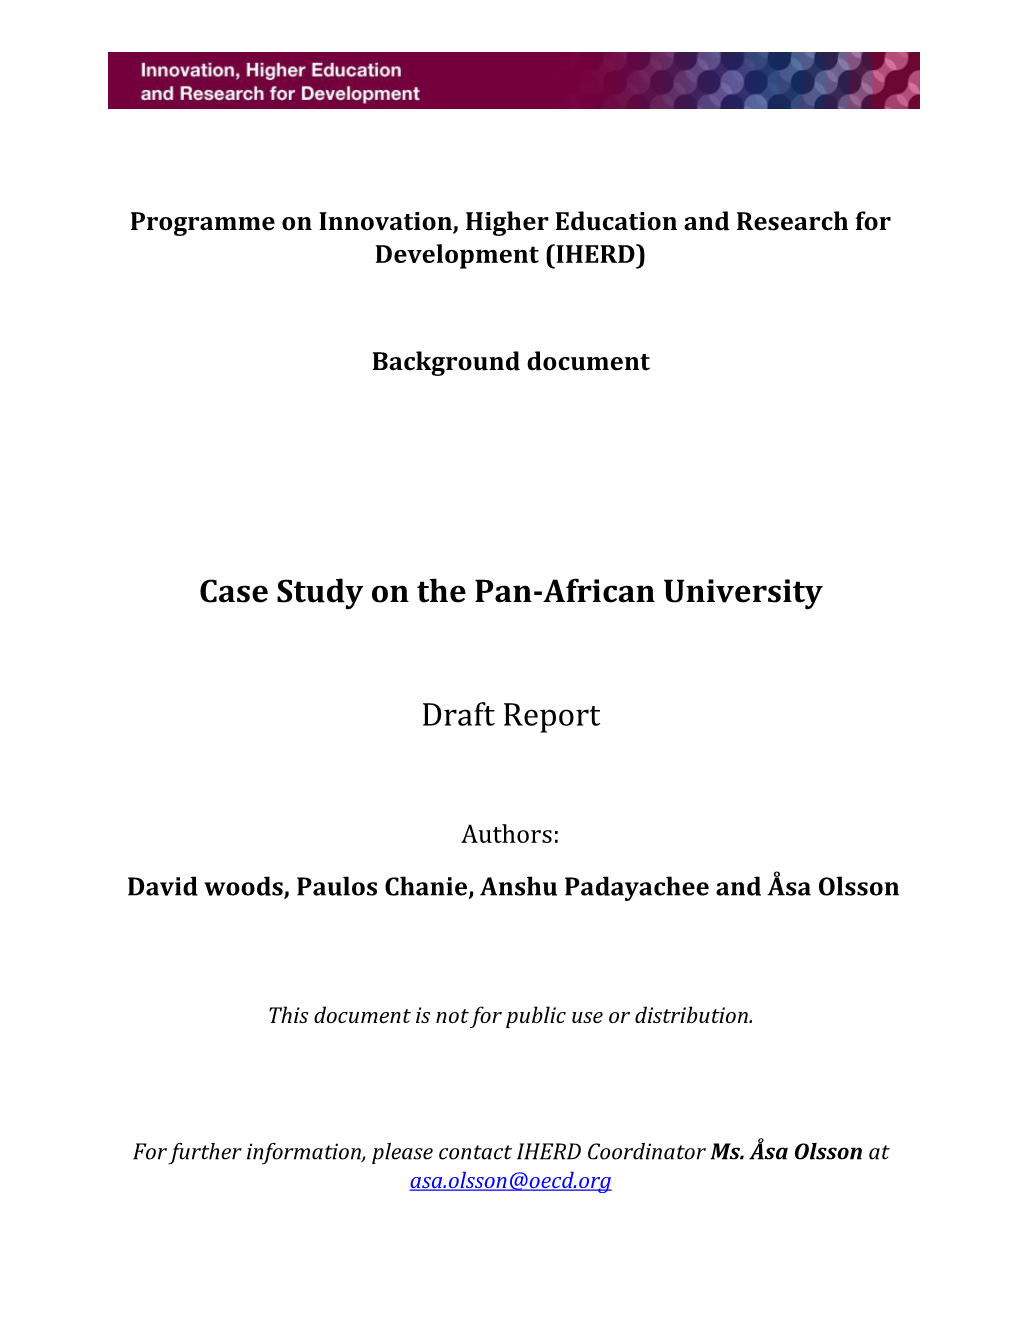 Case Study on the Pan-African University Draft Report